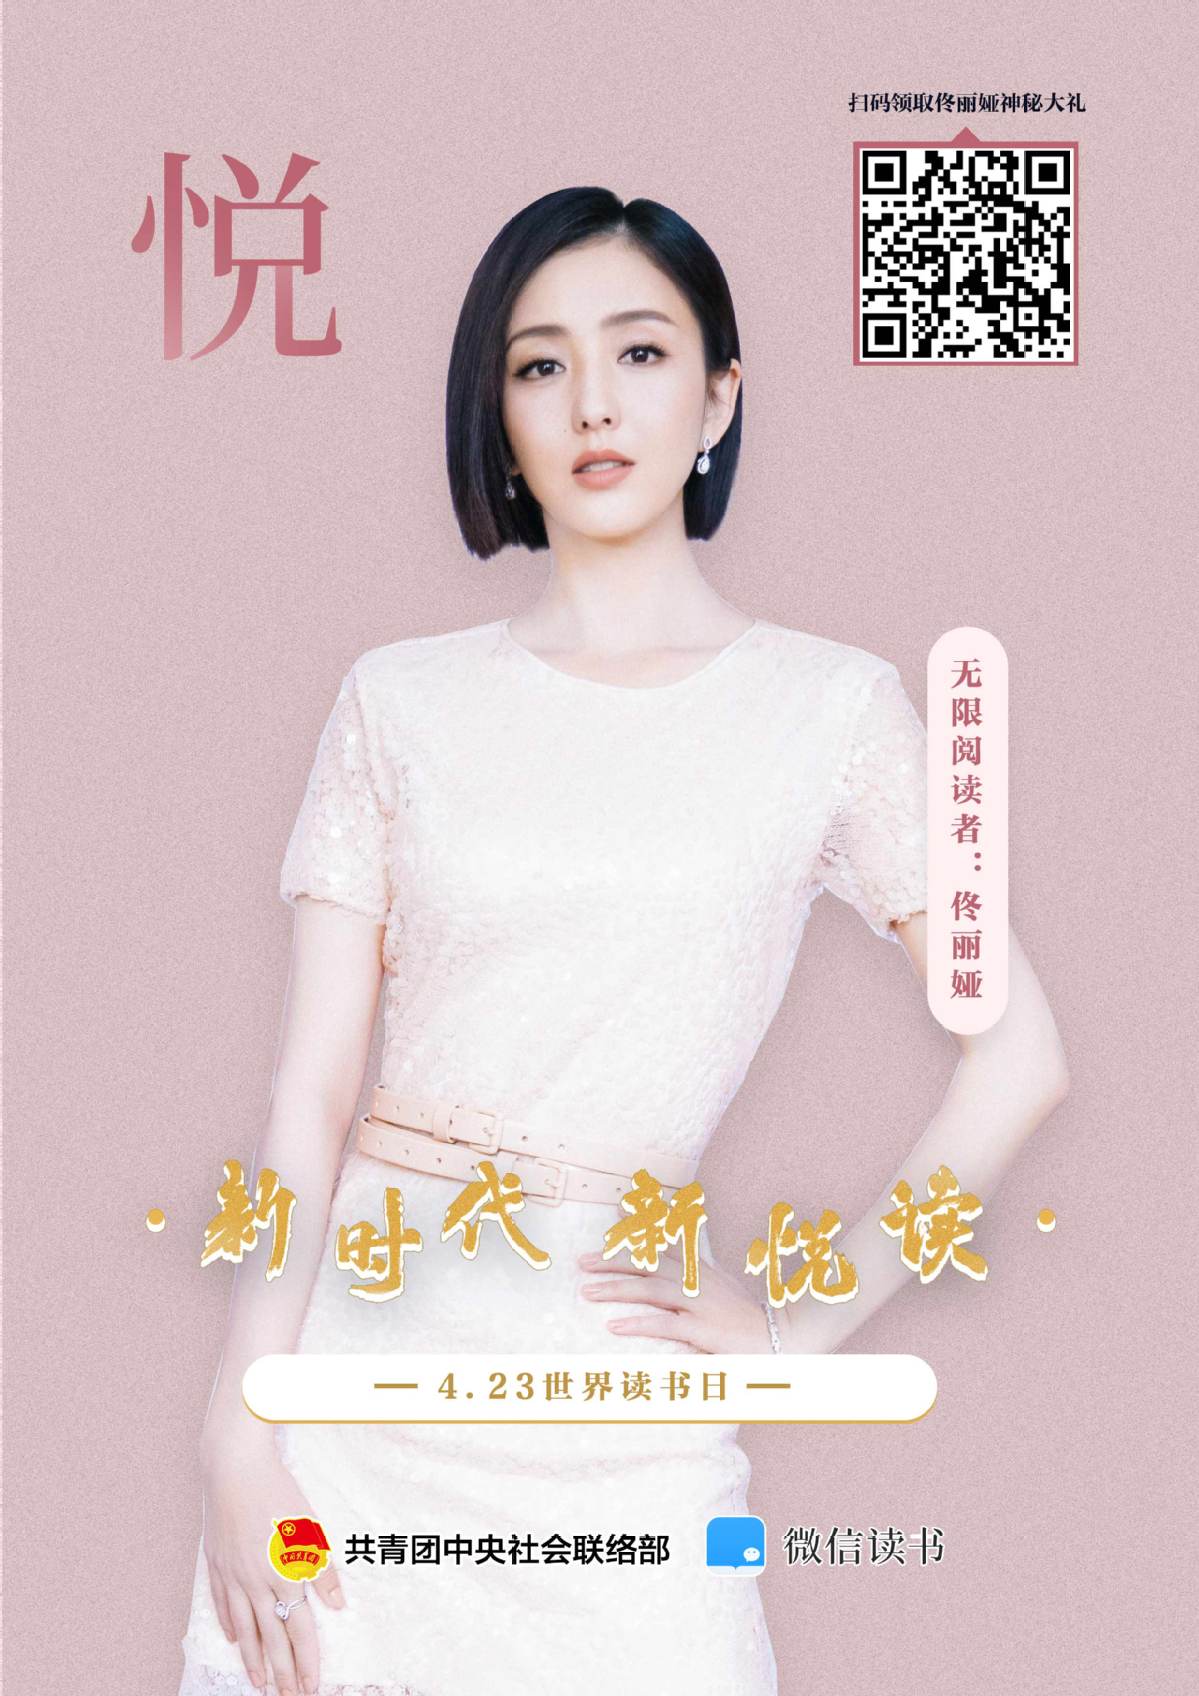 WeChat Read teams up with celebrities for free book campaign